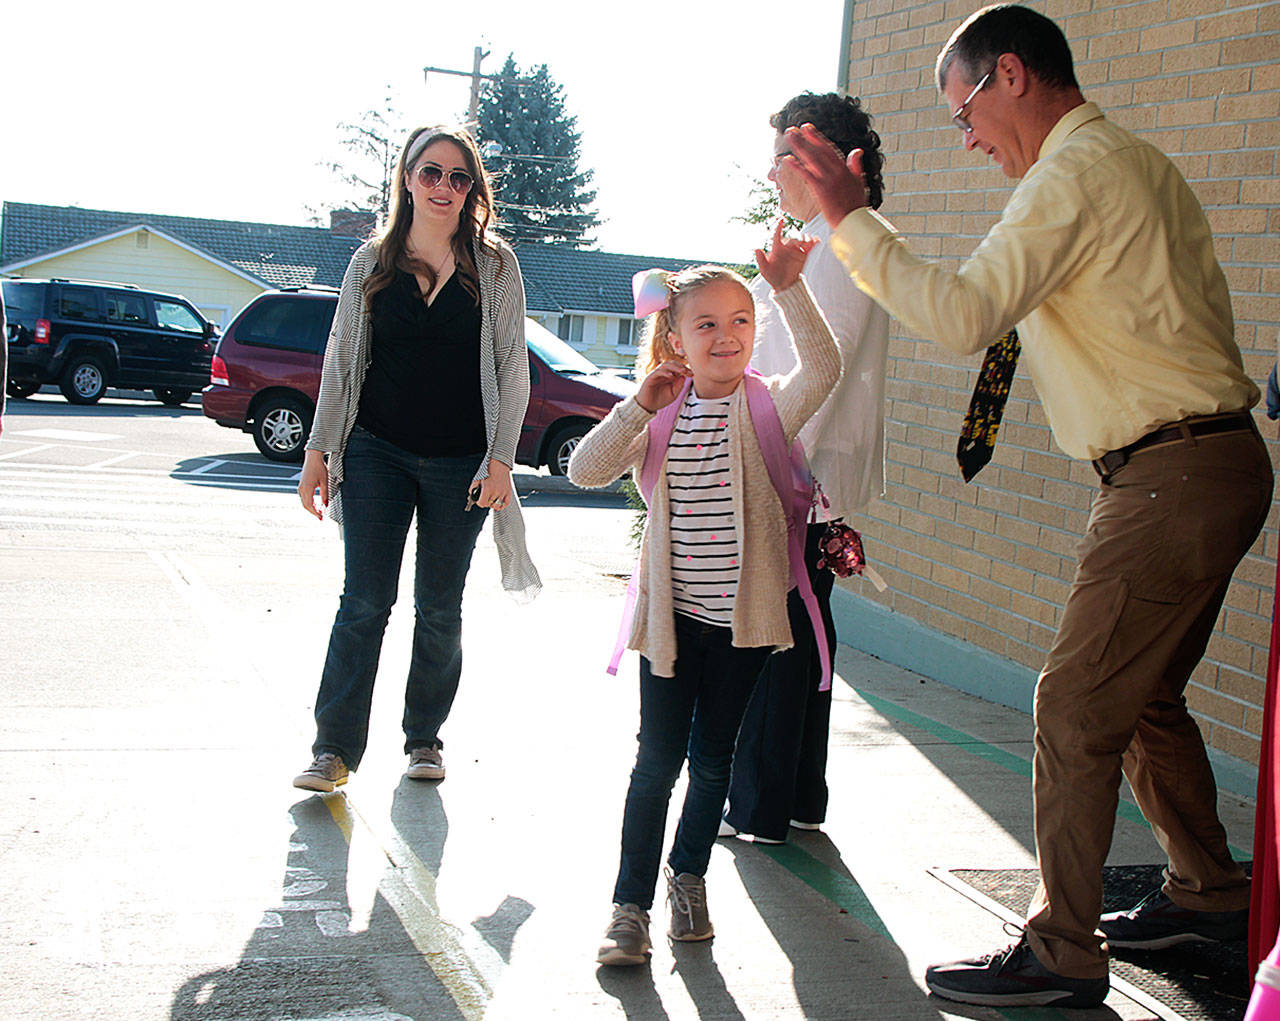 Olivia King high fives teacher Philip Southwick on her first day of second grade Thursday at Broad View Elementary School in Oak Harbor. Buses were back on the road this week, with the school year starting in both Oak Harbor and Coupeville. Photo by Laura Guido/Whidbey News-Times